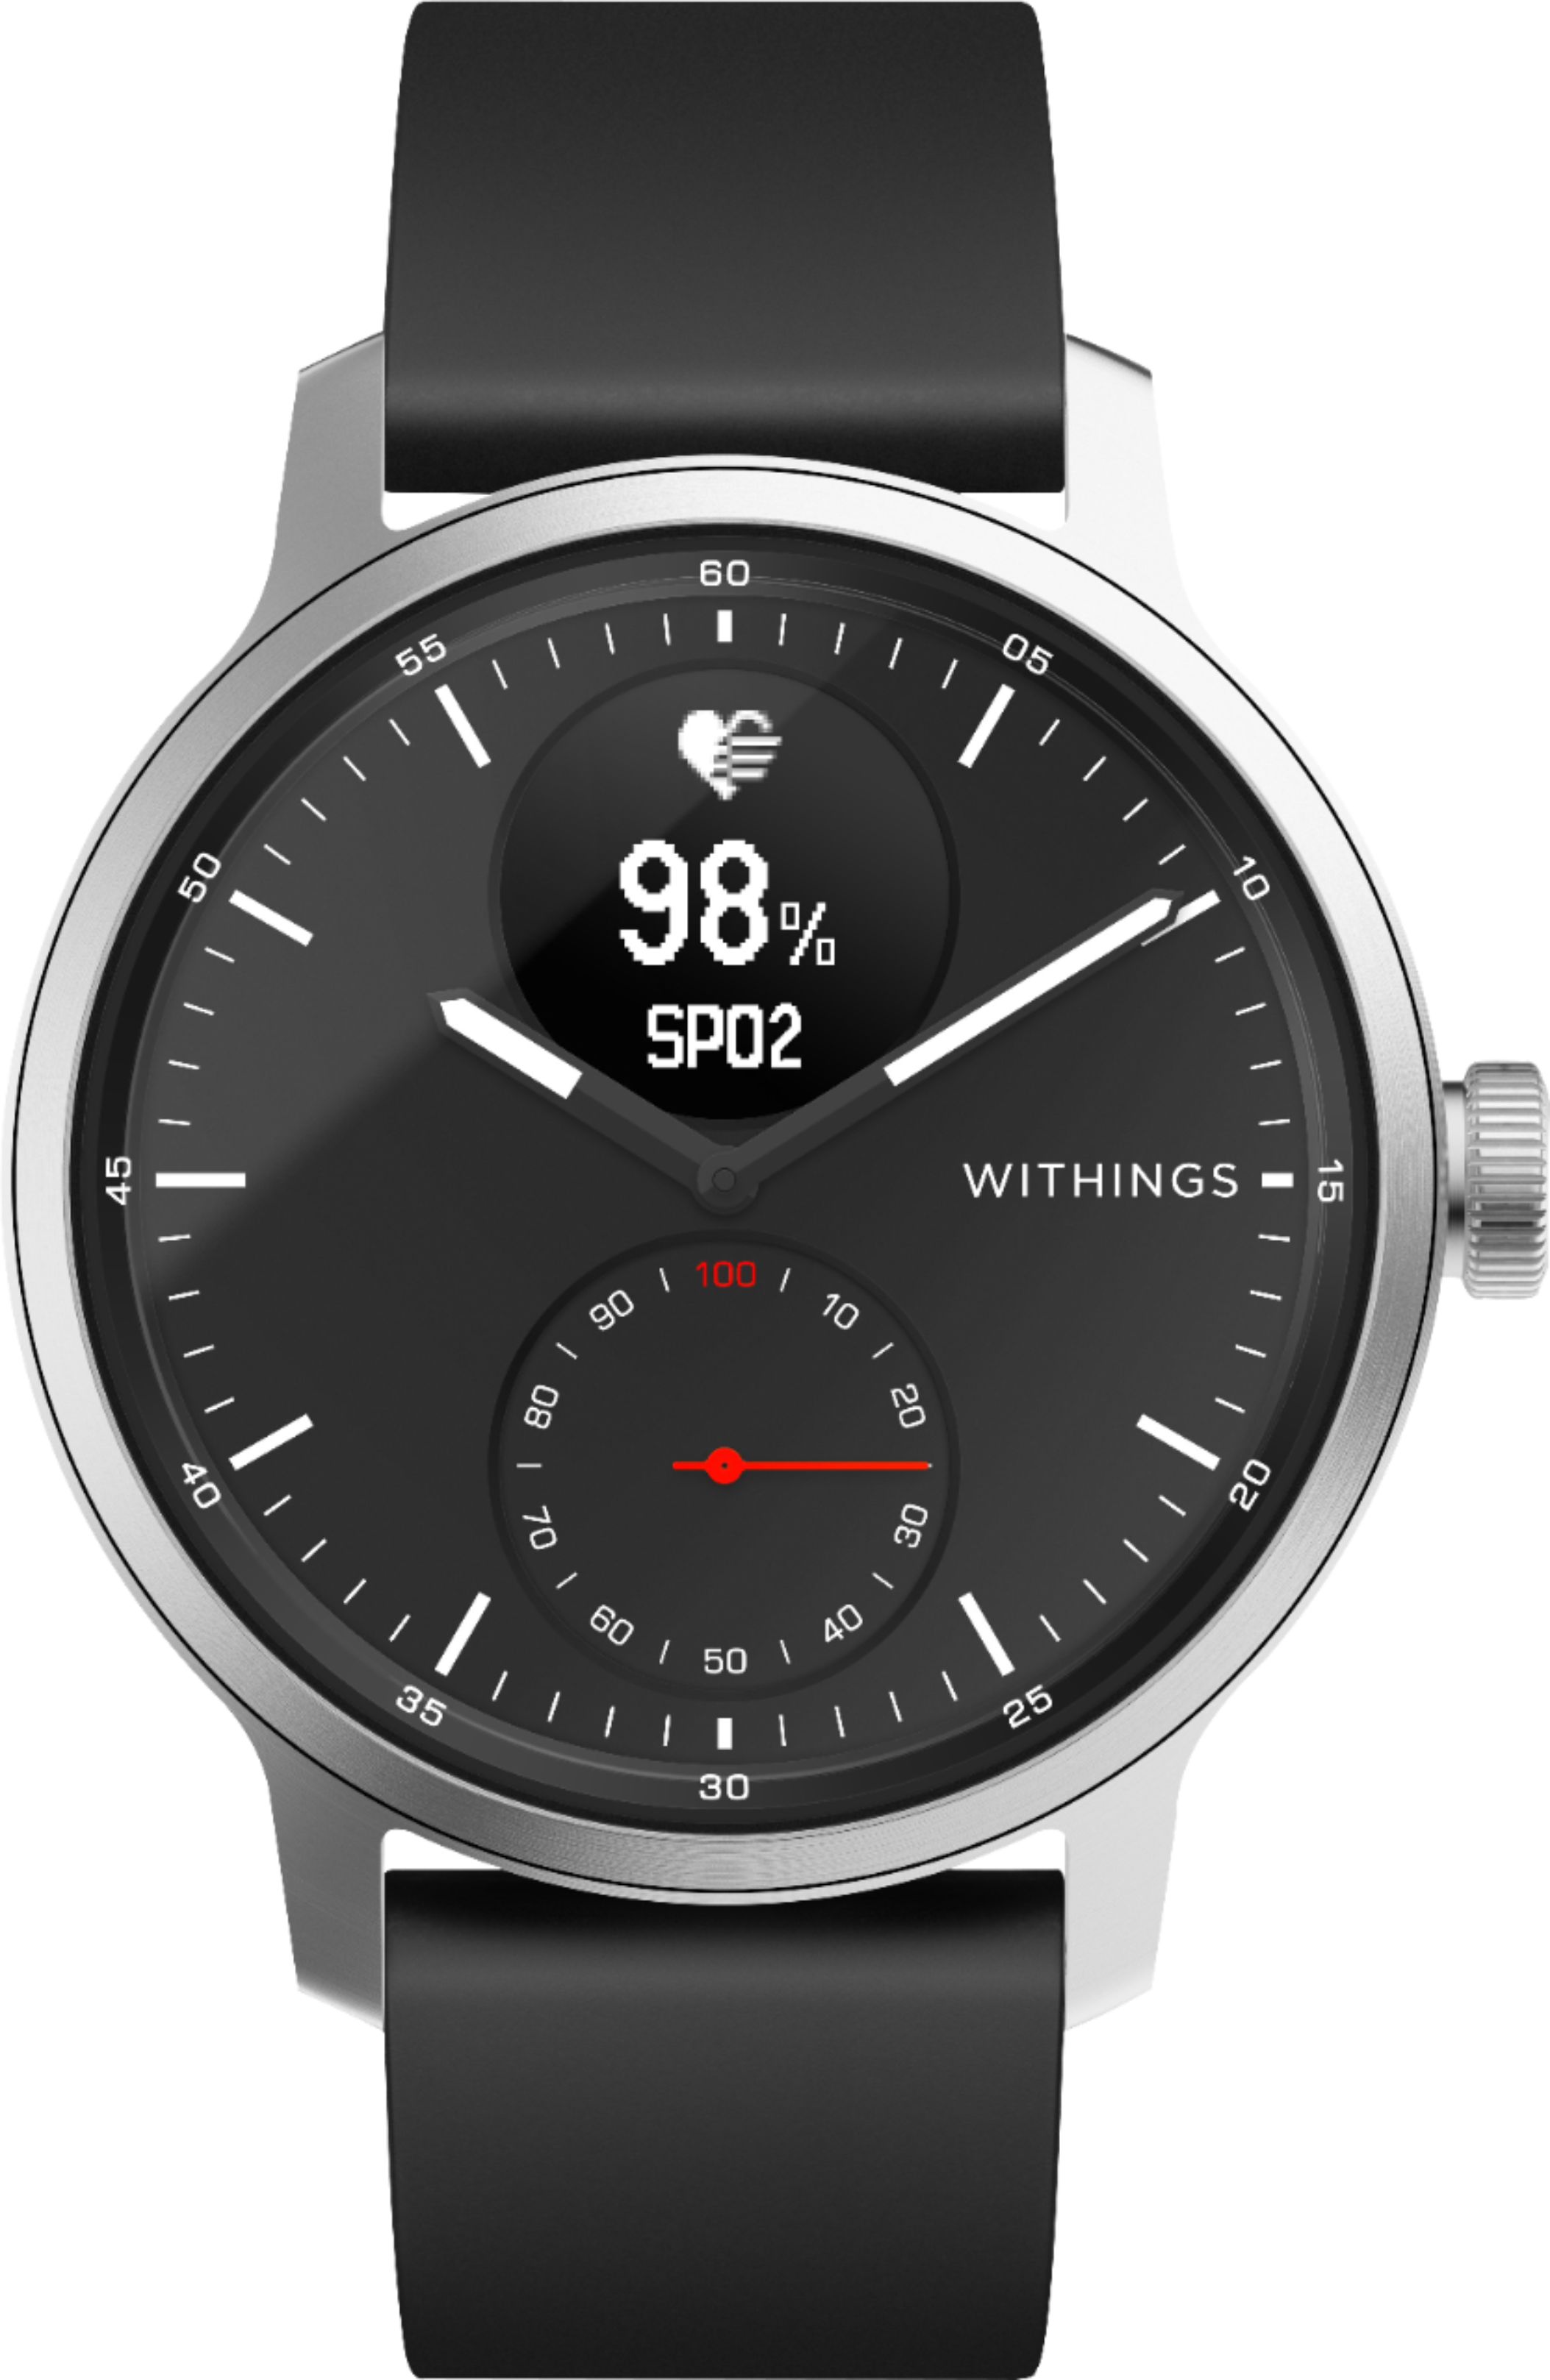 Withings - SCANWATCH - Hybrid Smartwatch with ECG, heart rate and oximeter - Black, 42mm - Black